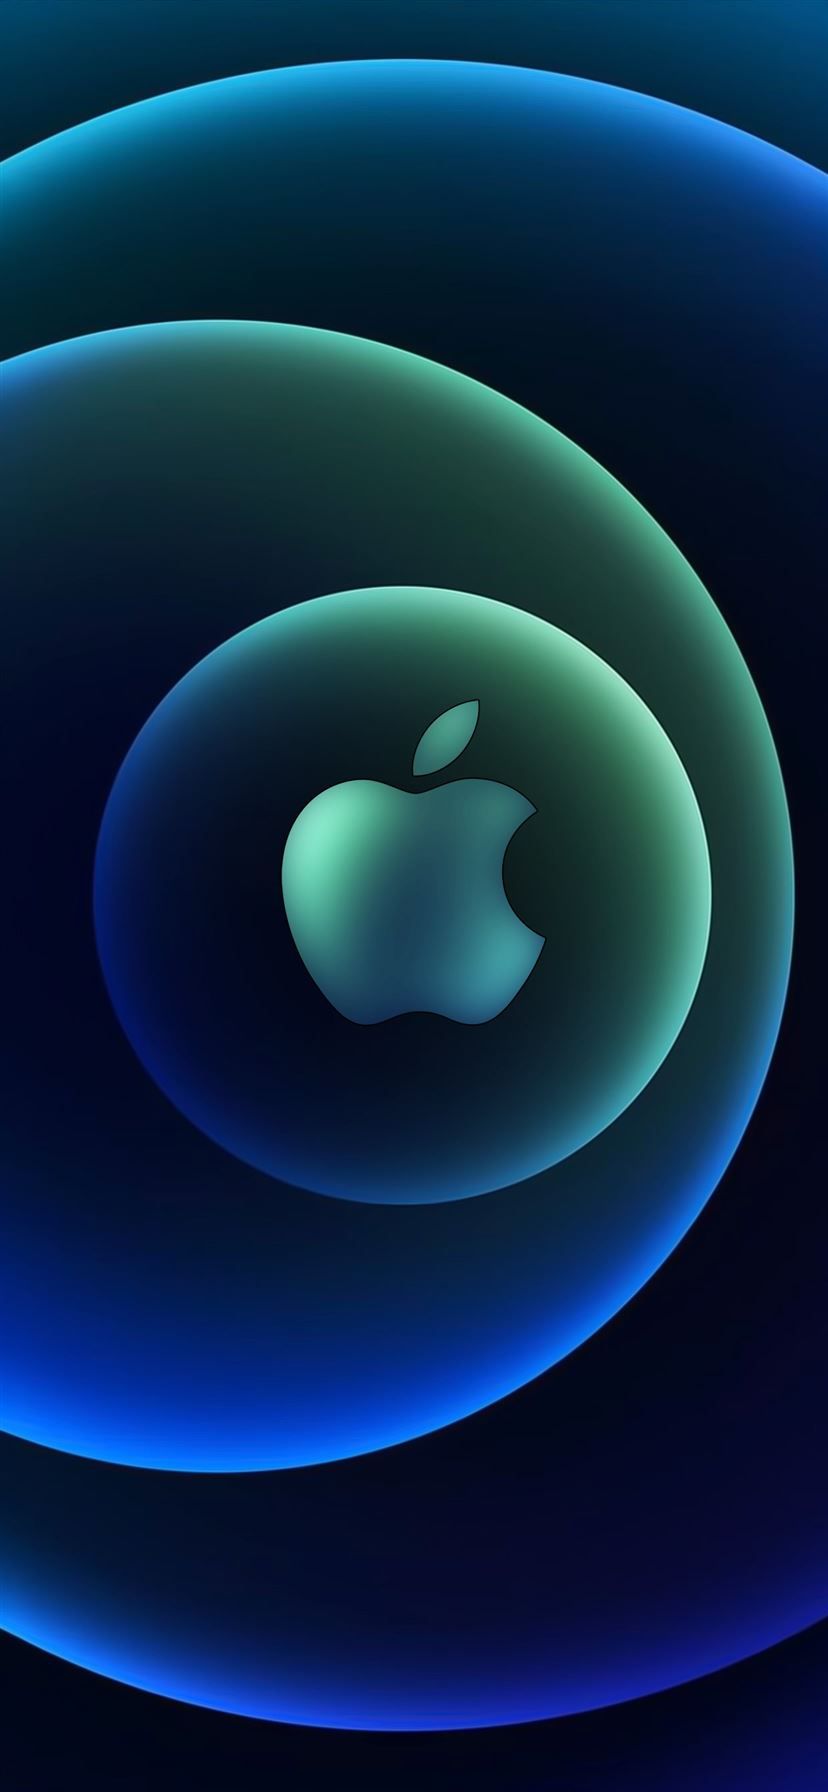 Apple Event 13 Oct Logo Dark by AR7 iPhone 11 Wallpaper Free Download